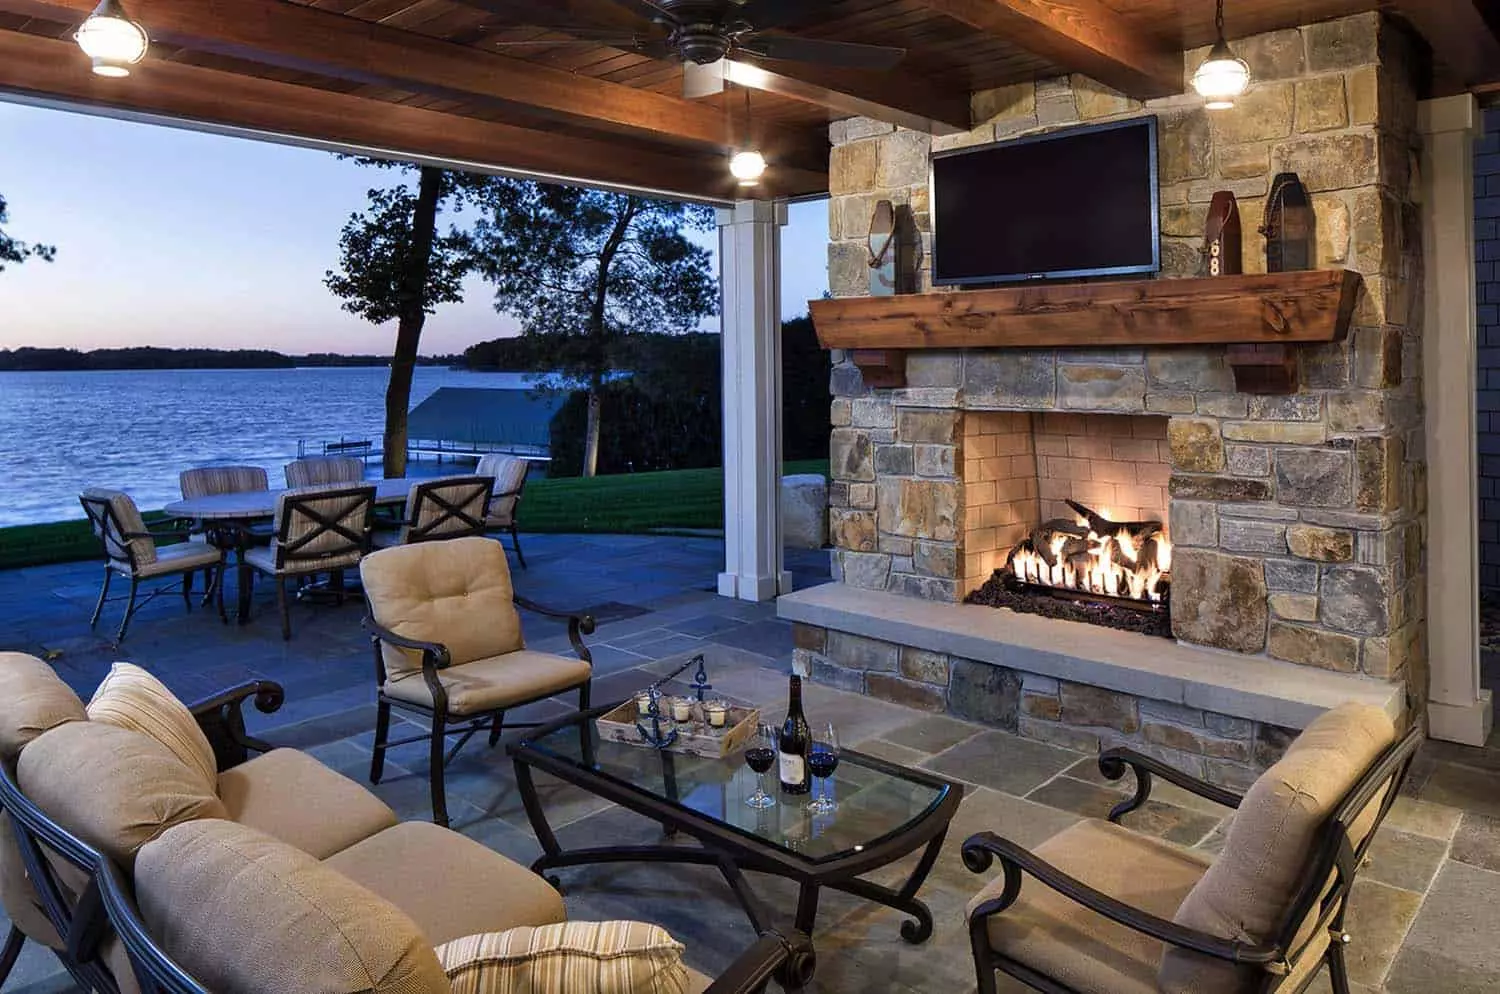 Covered outdoor living space with fireplace